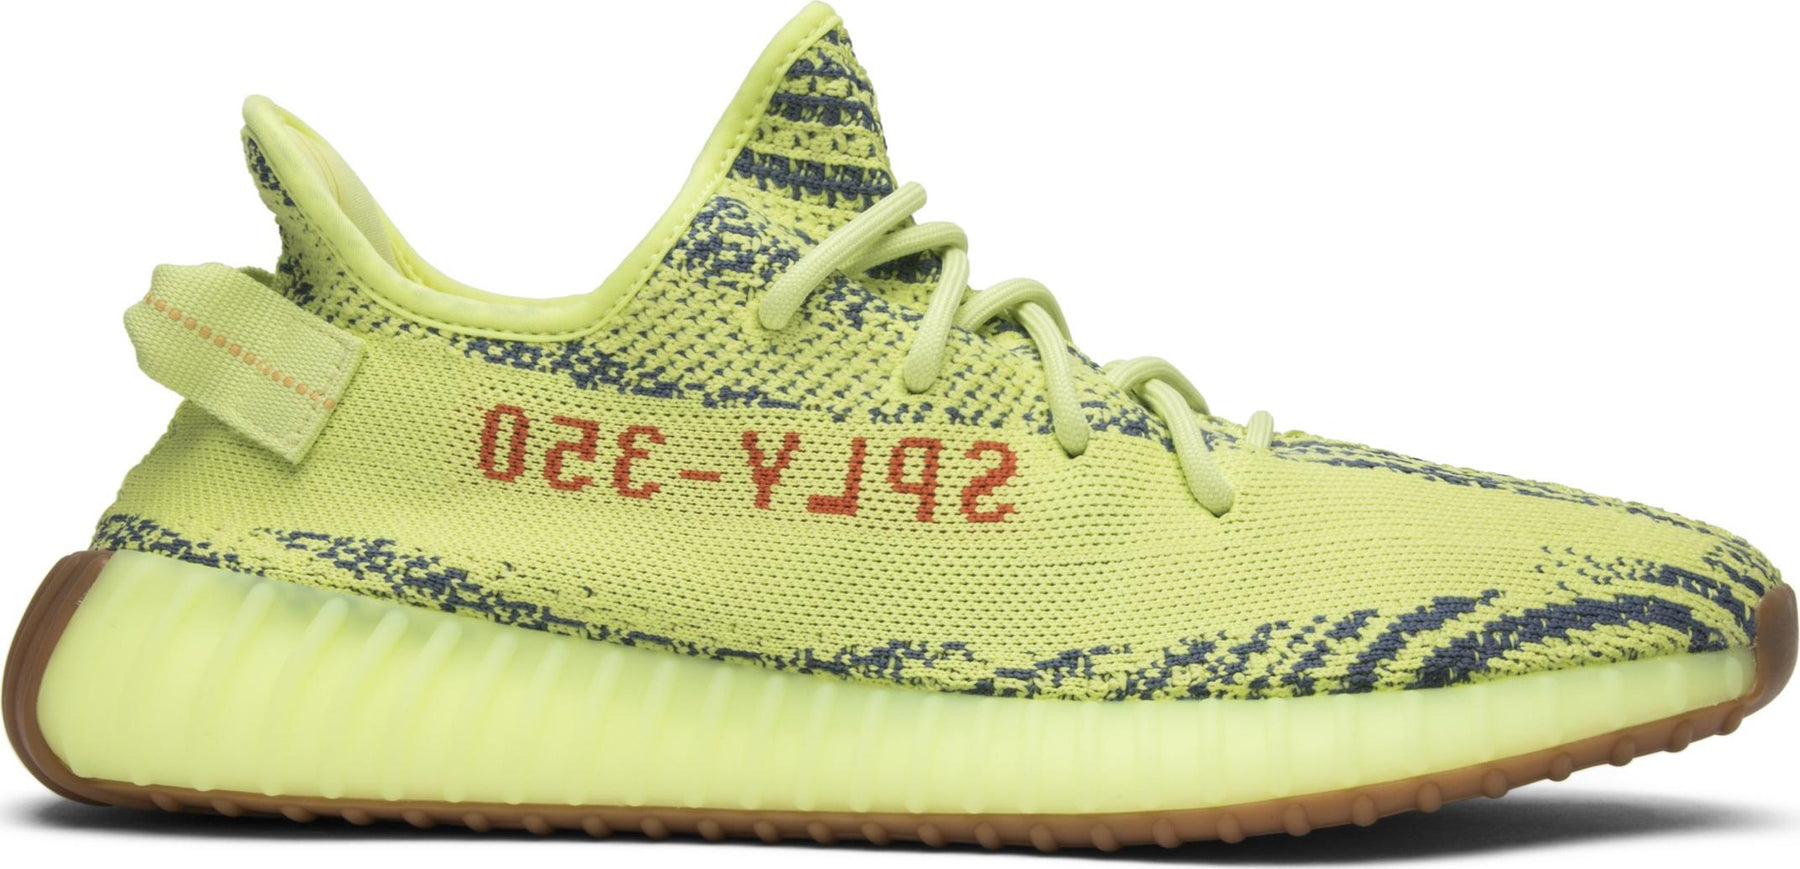 Adidas Yeezy Boost 350 V2 Semi Frozen Yellow (PreOwned)(Rep Box)